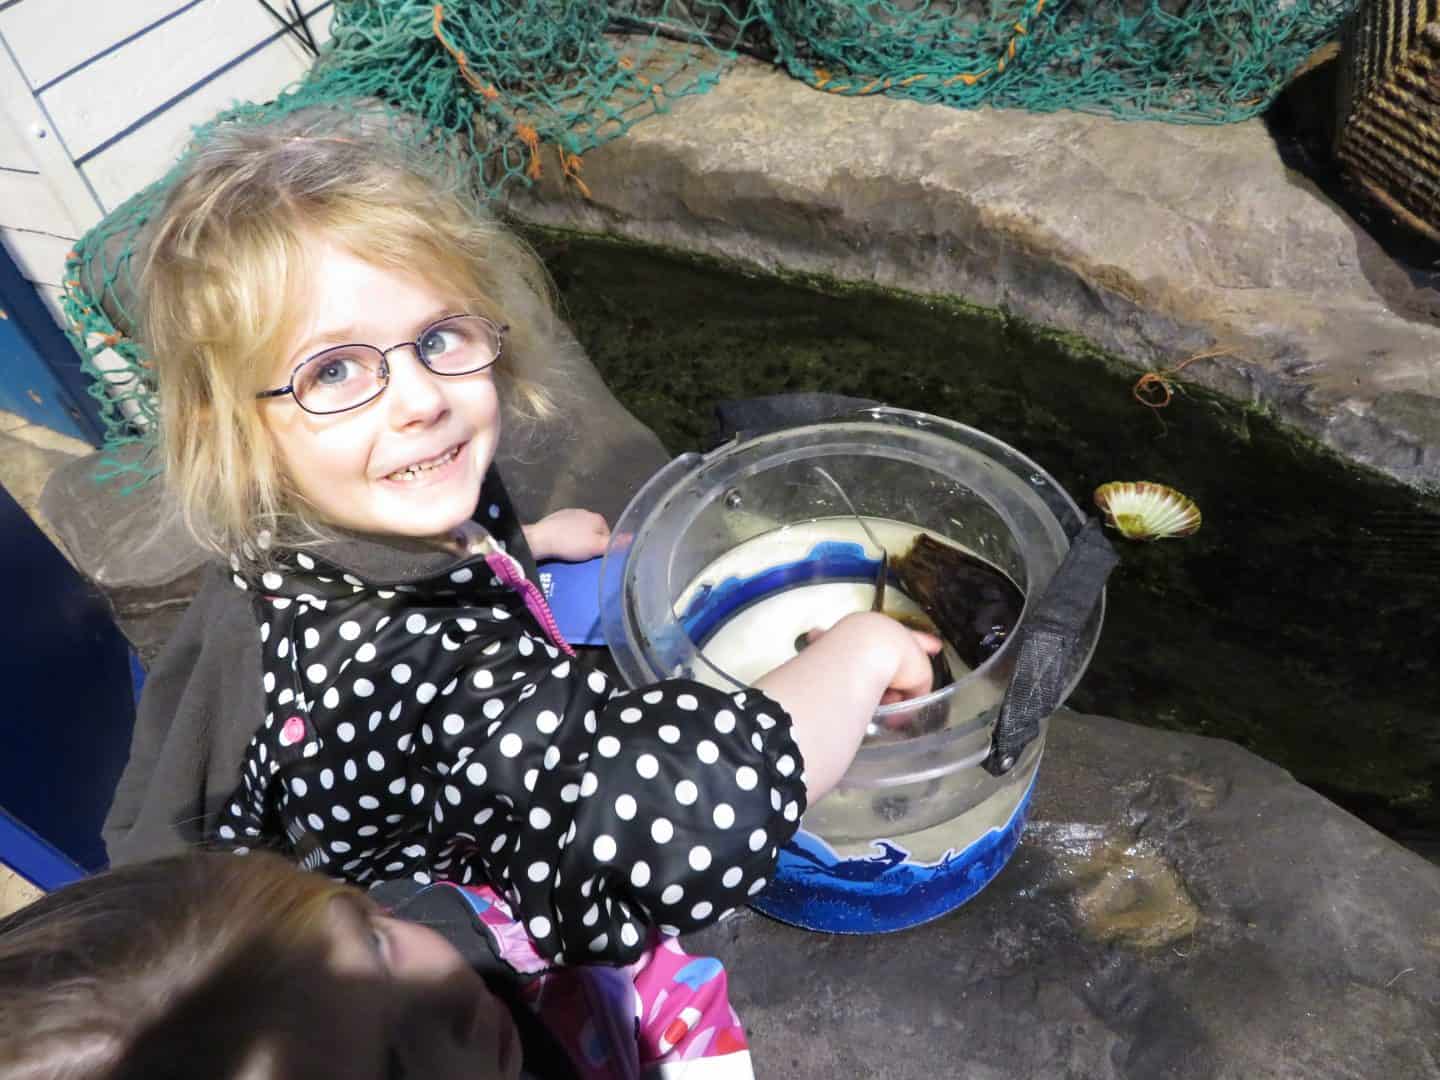 Little girl in black coat with white spots putting her hand into water to touch shark eggs at Sea Life Centre, one of the best rainy days out West Midlands